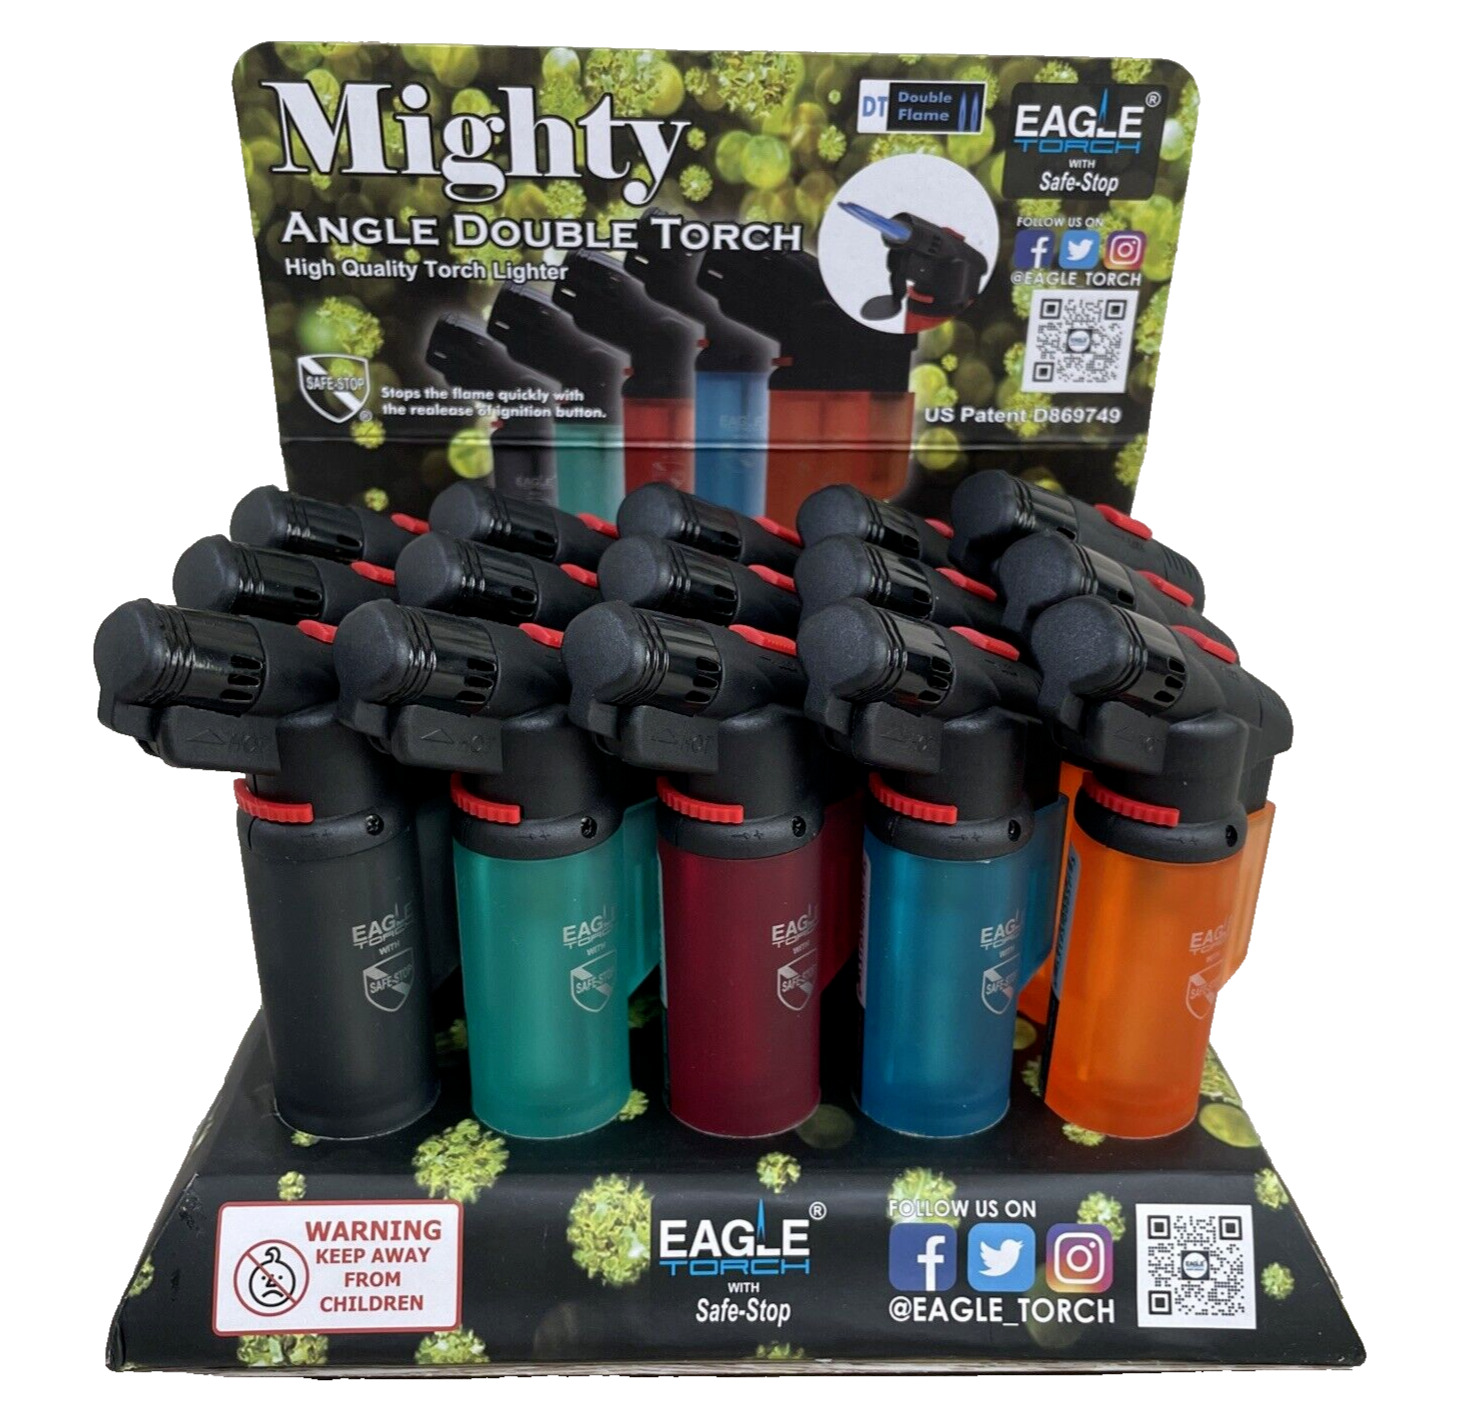 Eagle Torch Angle Double Torch Windproof Adjustable Butane Jet Flame New 15 Pack